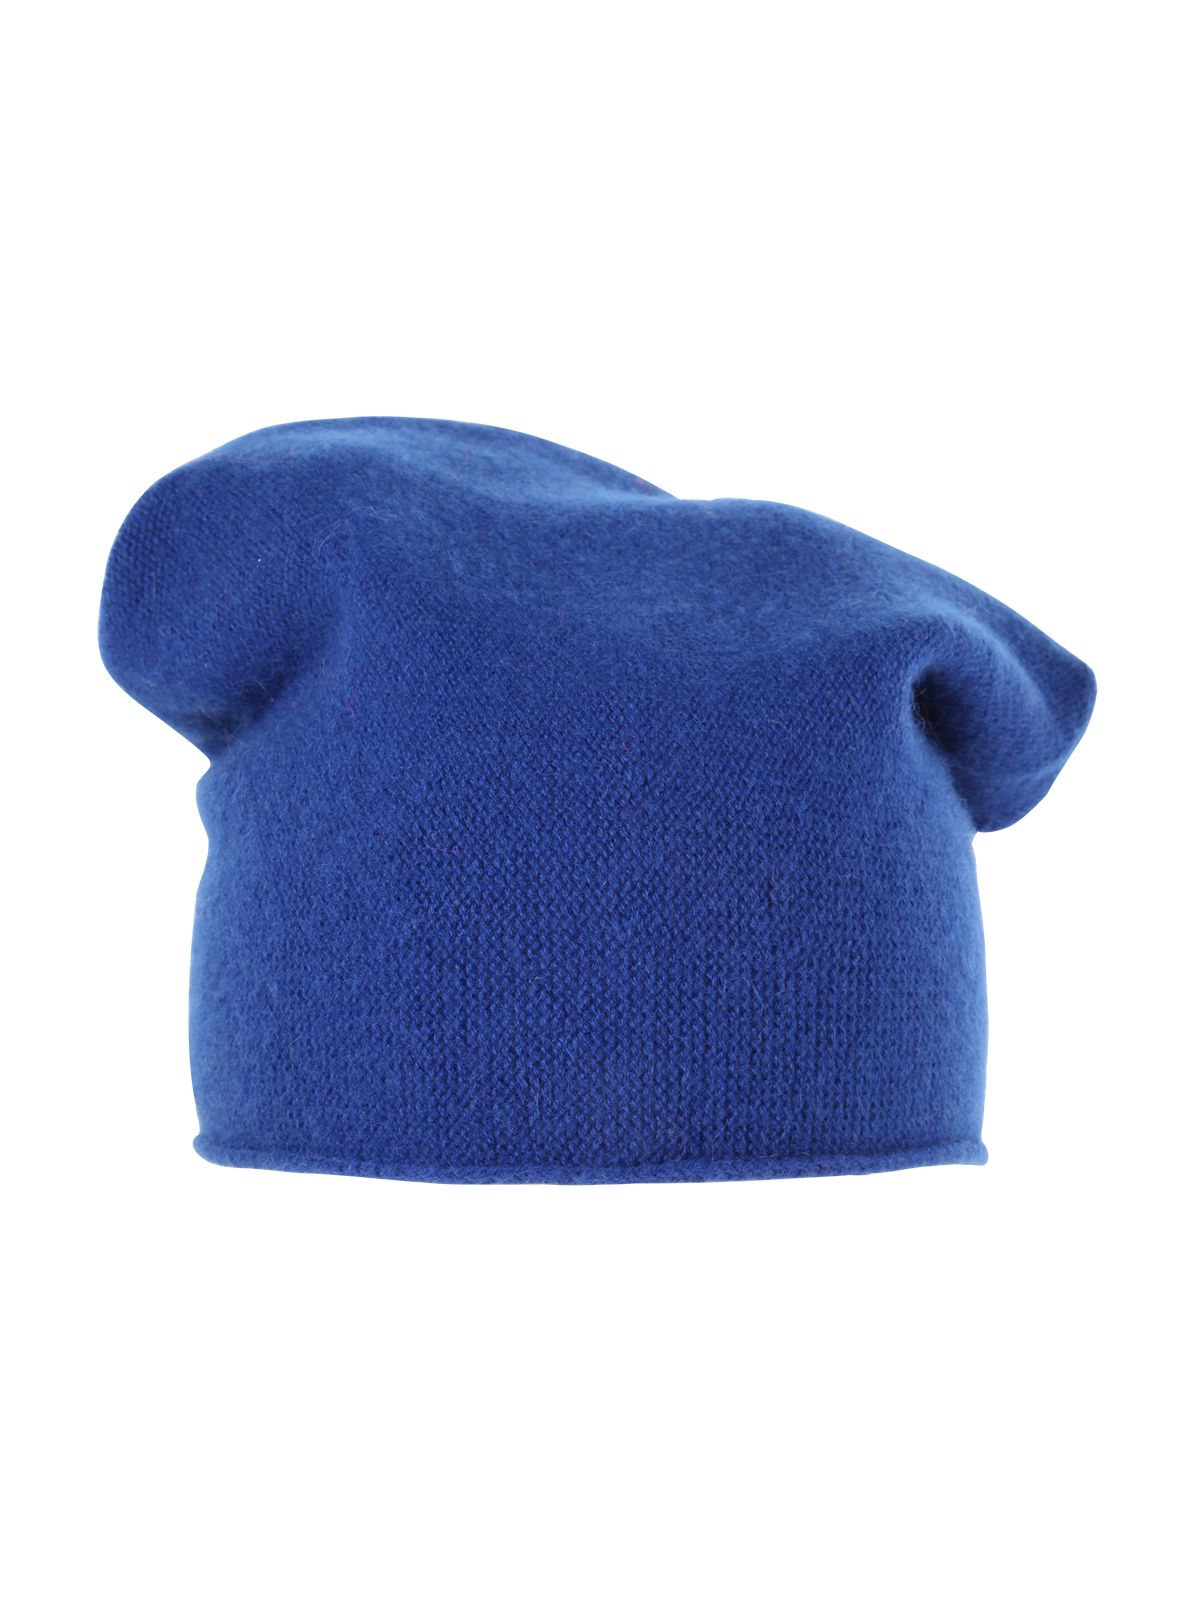 About Cashmere Beanie